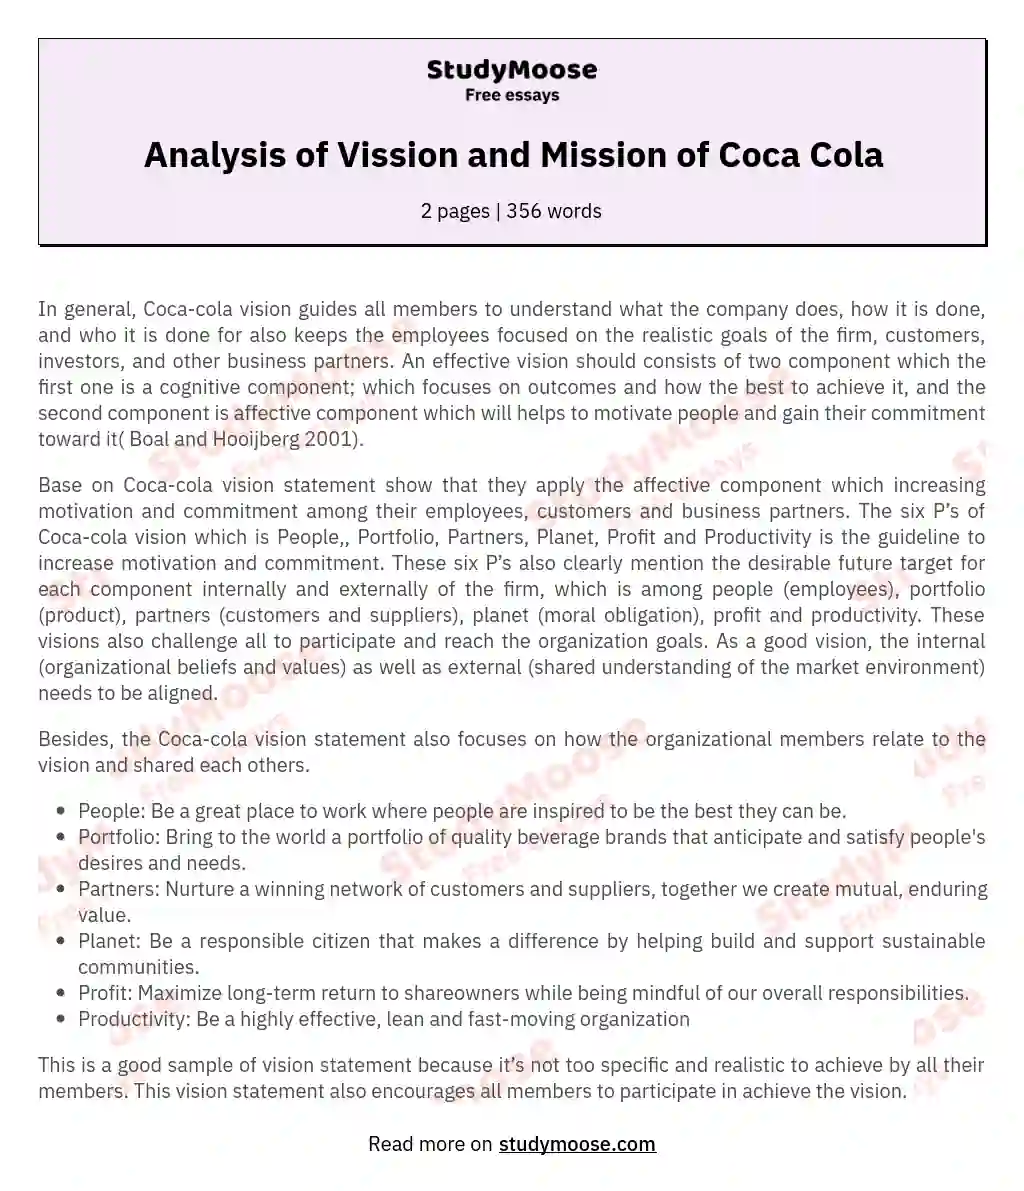 Analysis of Vission and Mission of Coca Cola essay